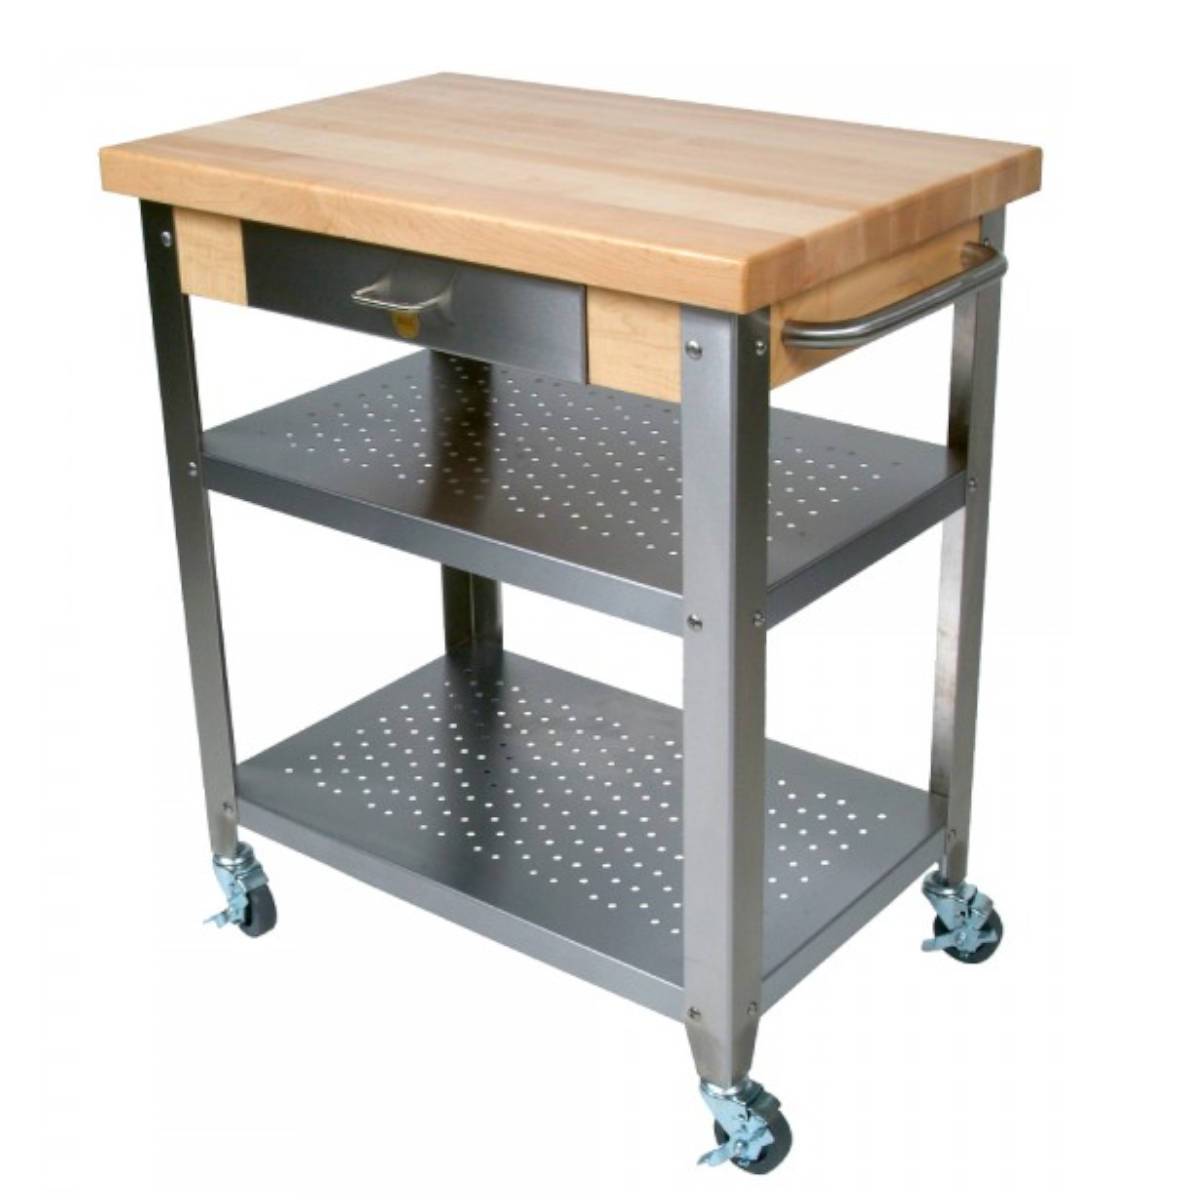 Stainless steel kitchen cart with drawers